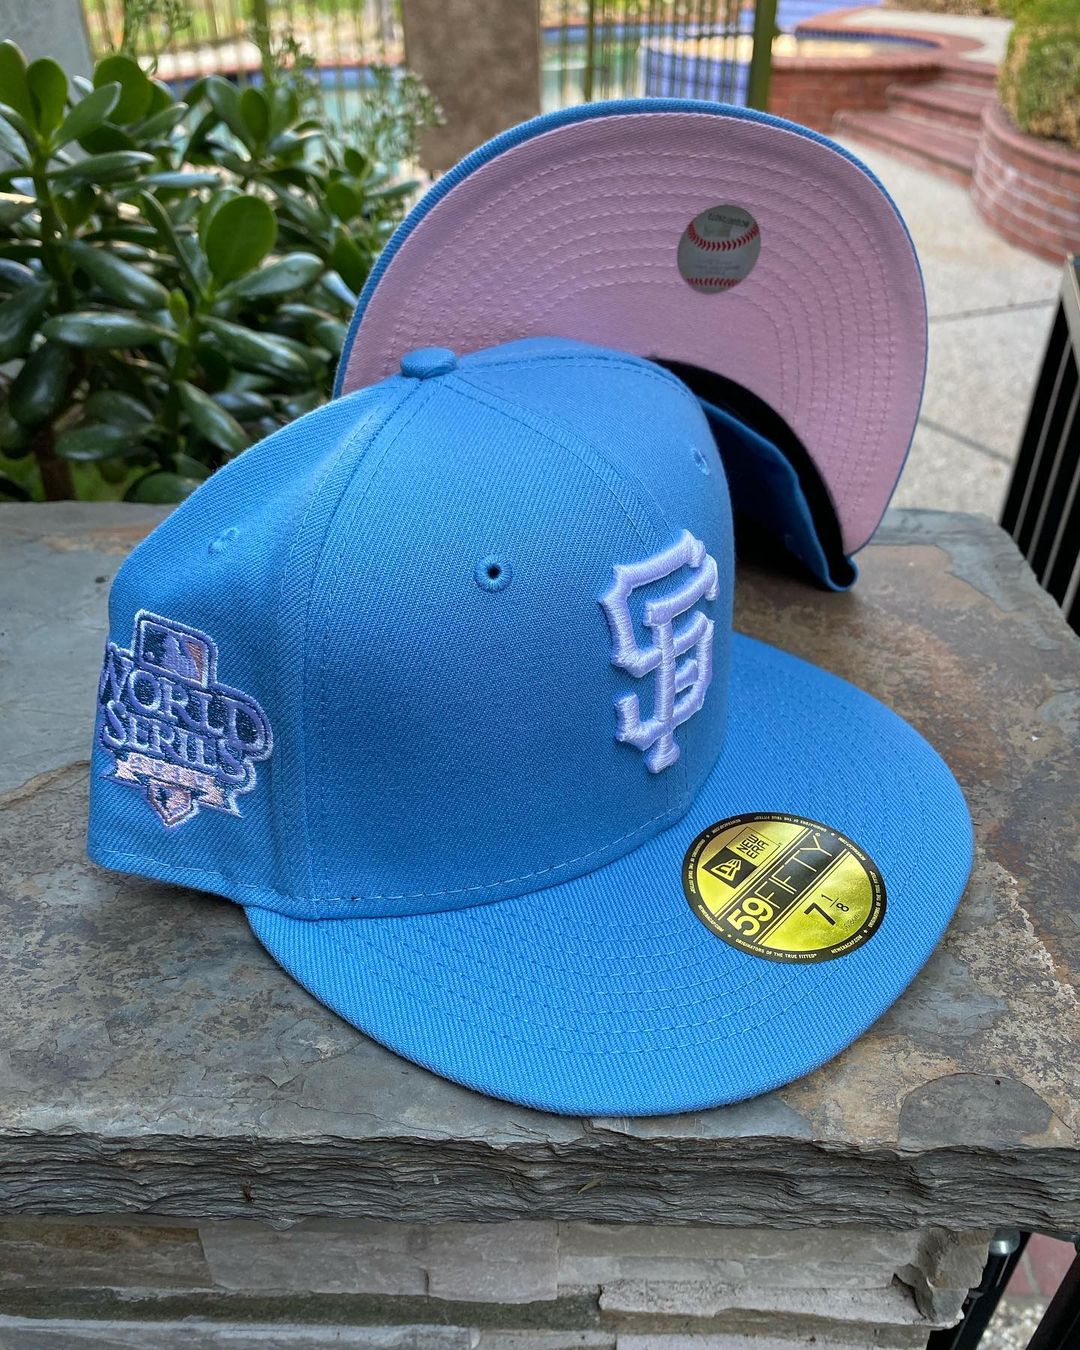 Cotton Candy SF Giants Fitted Hat